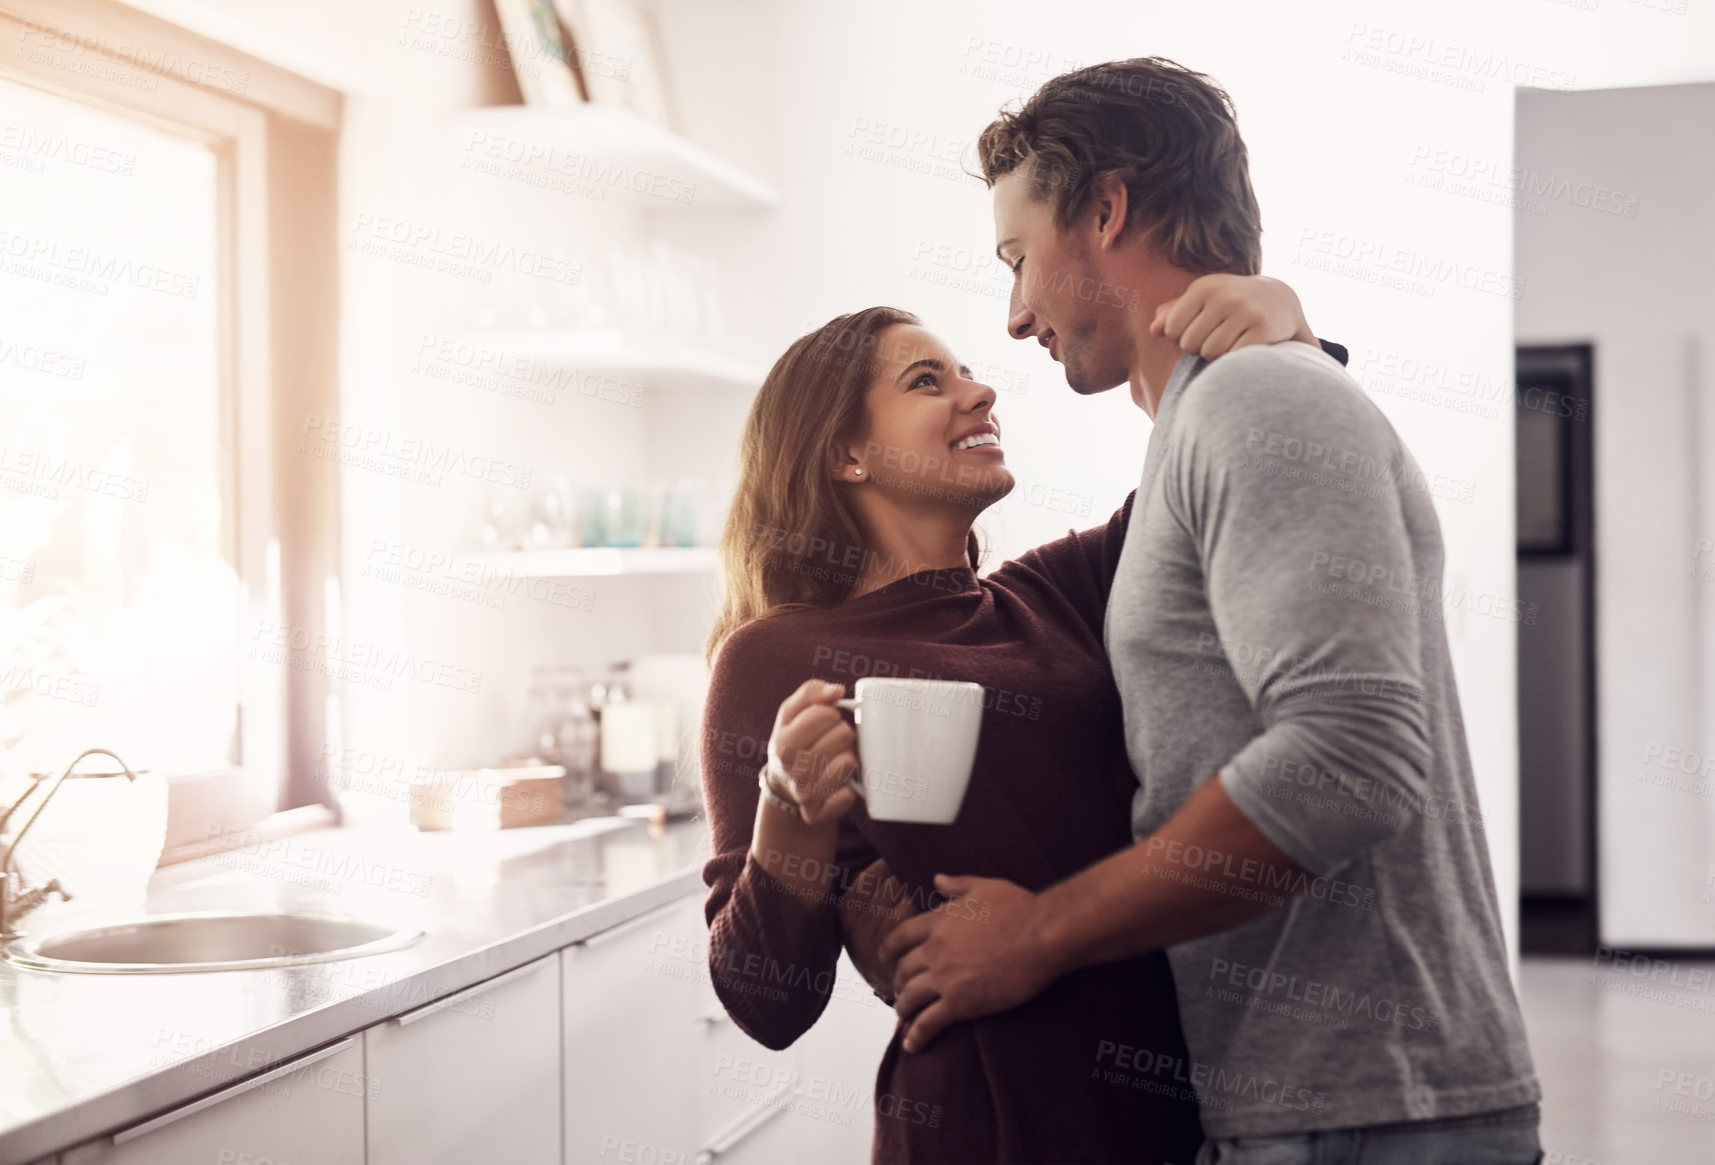 Buy stock photo Shot of an affectionate young couple having a coffee break at home